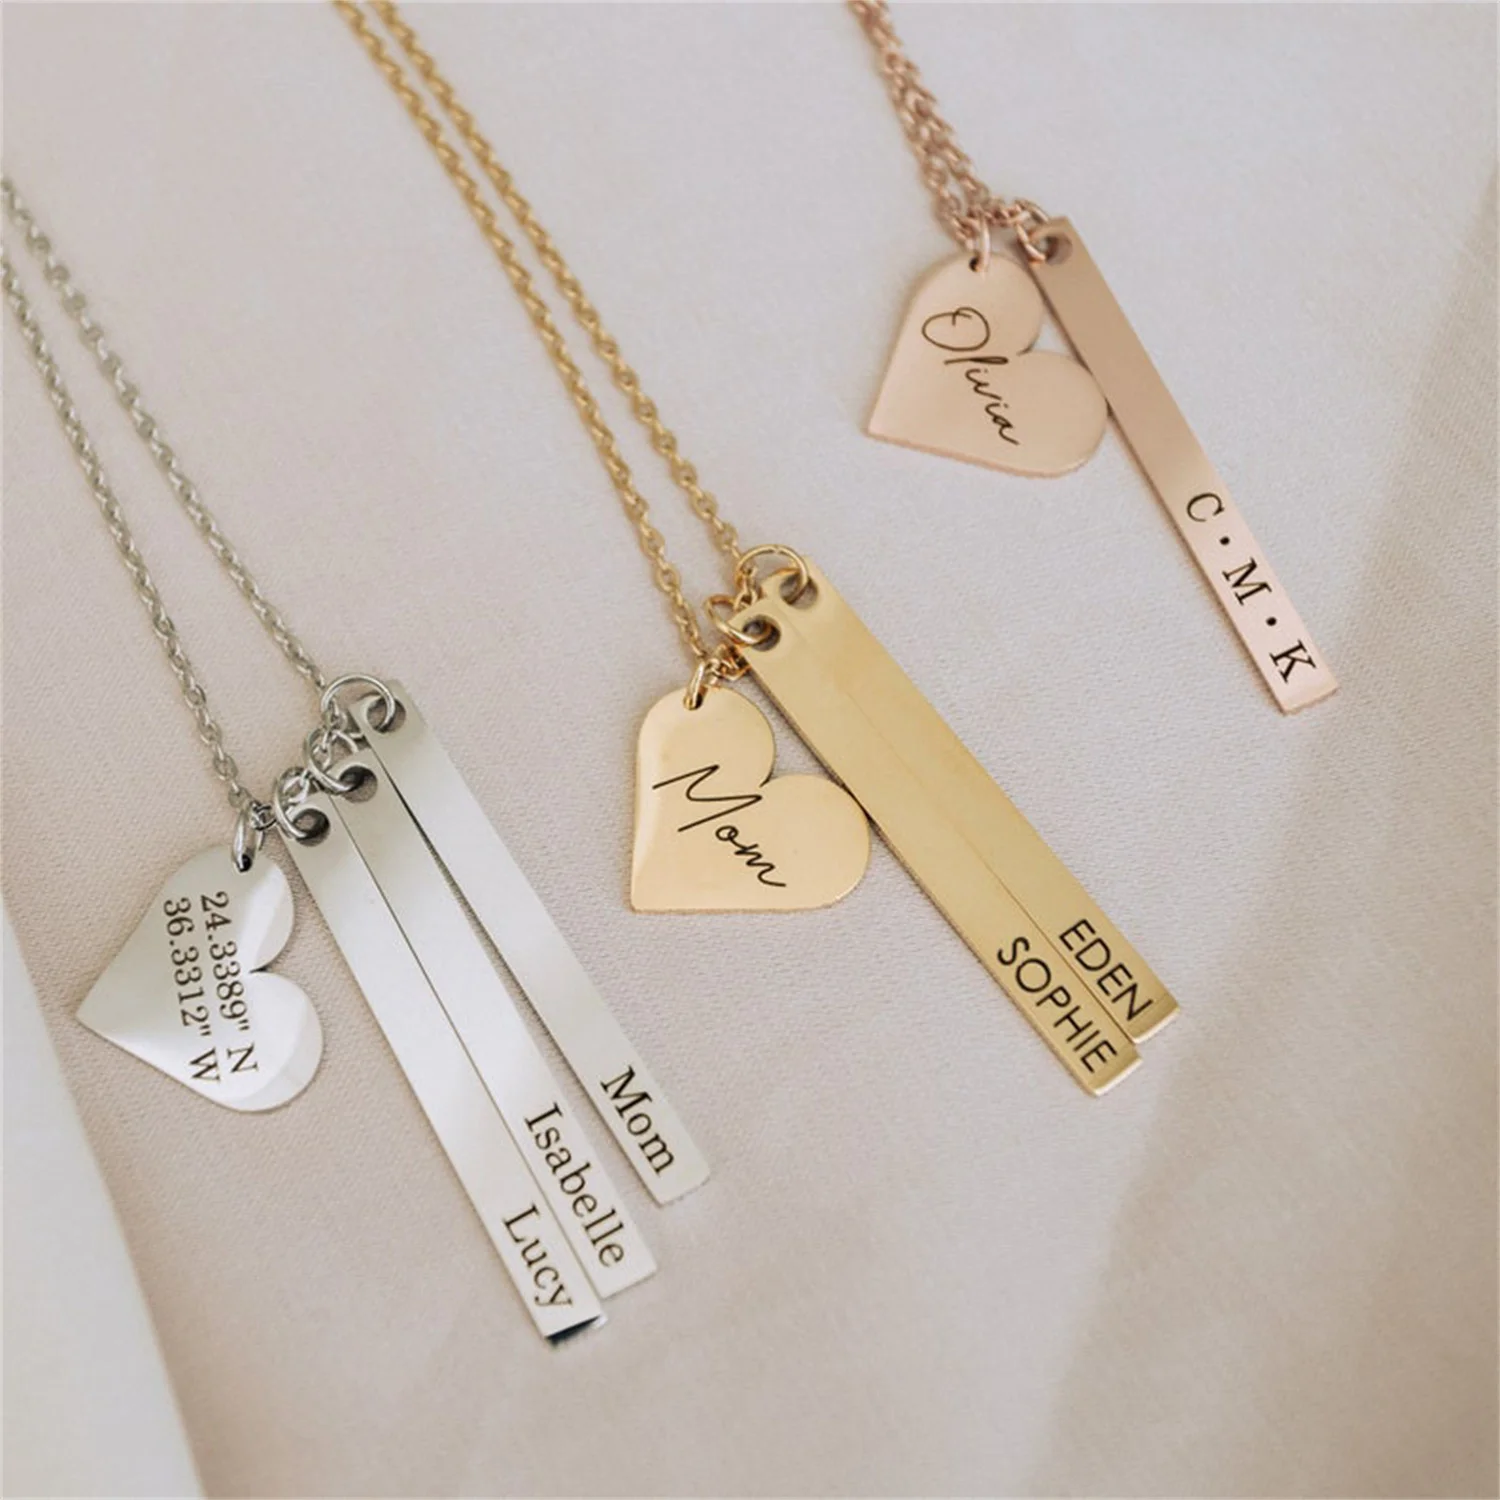 Personalized Engraved Name Bar Necklace Custom Heart Gold Charm Pendant Stainless Steel Jewelry Exquisite Gift For Family Friend 10 pairs lovers split heart stainless steel jewelry charm pendant mirror polished 2 half heart tag customized pendants wholesale